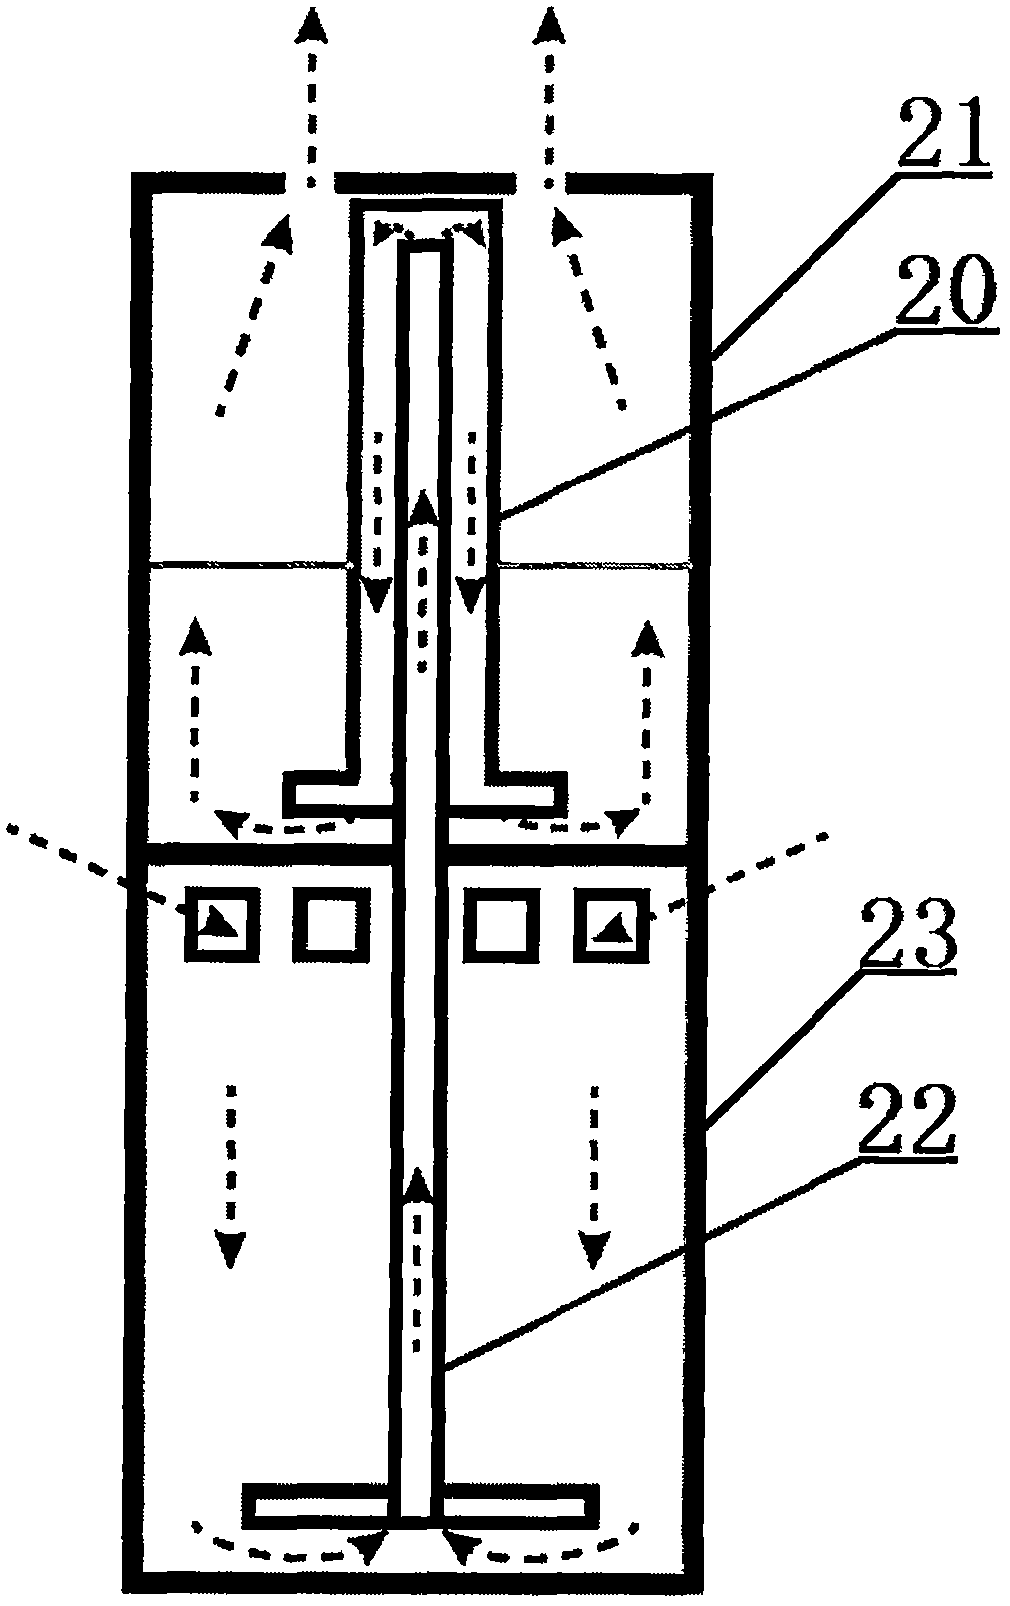 Gas absorption testing device